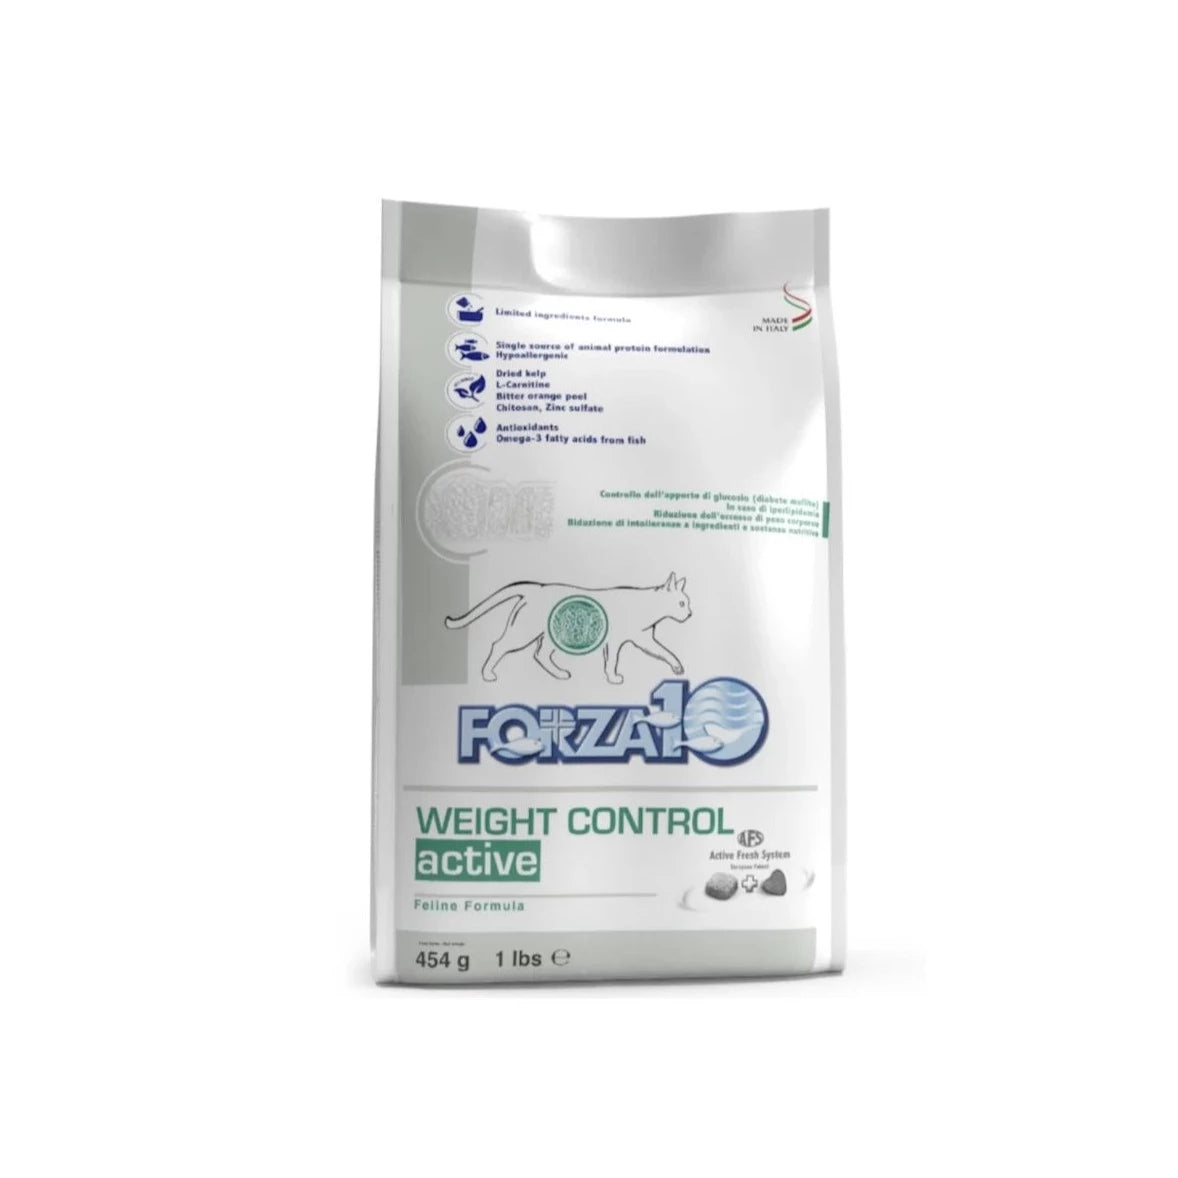 Forza 10 Gatto Weight Control Active